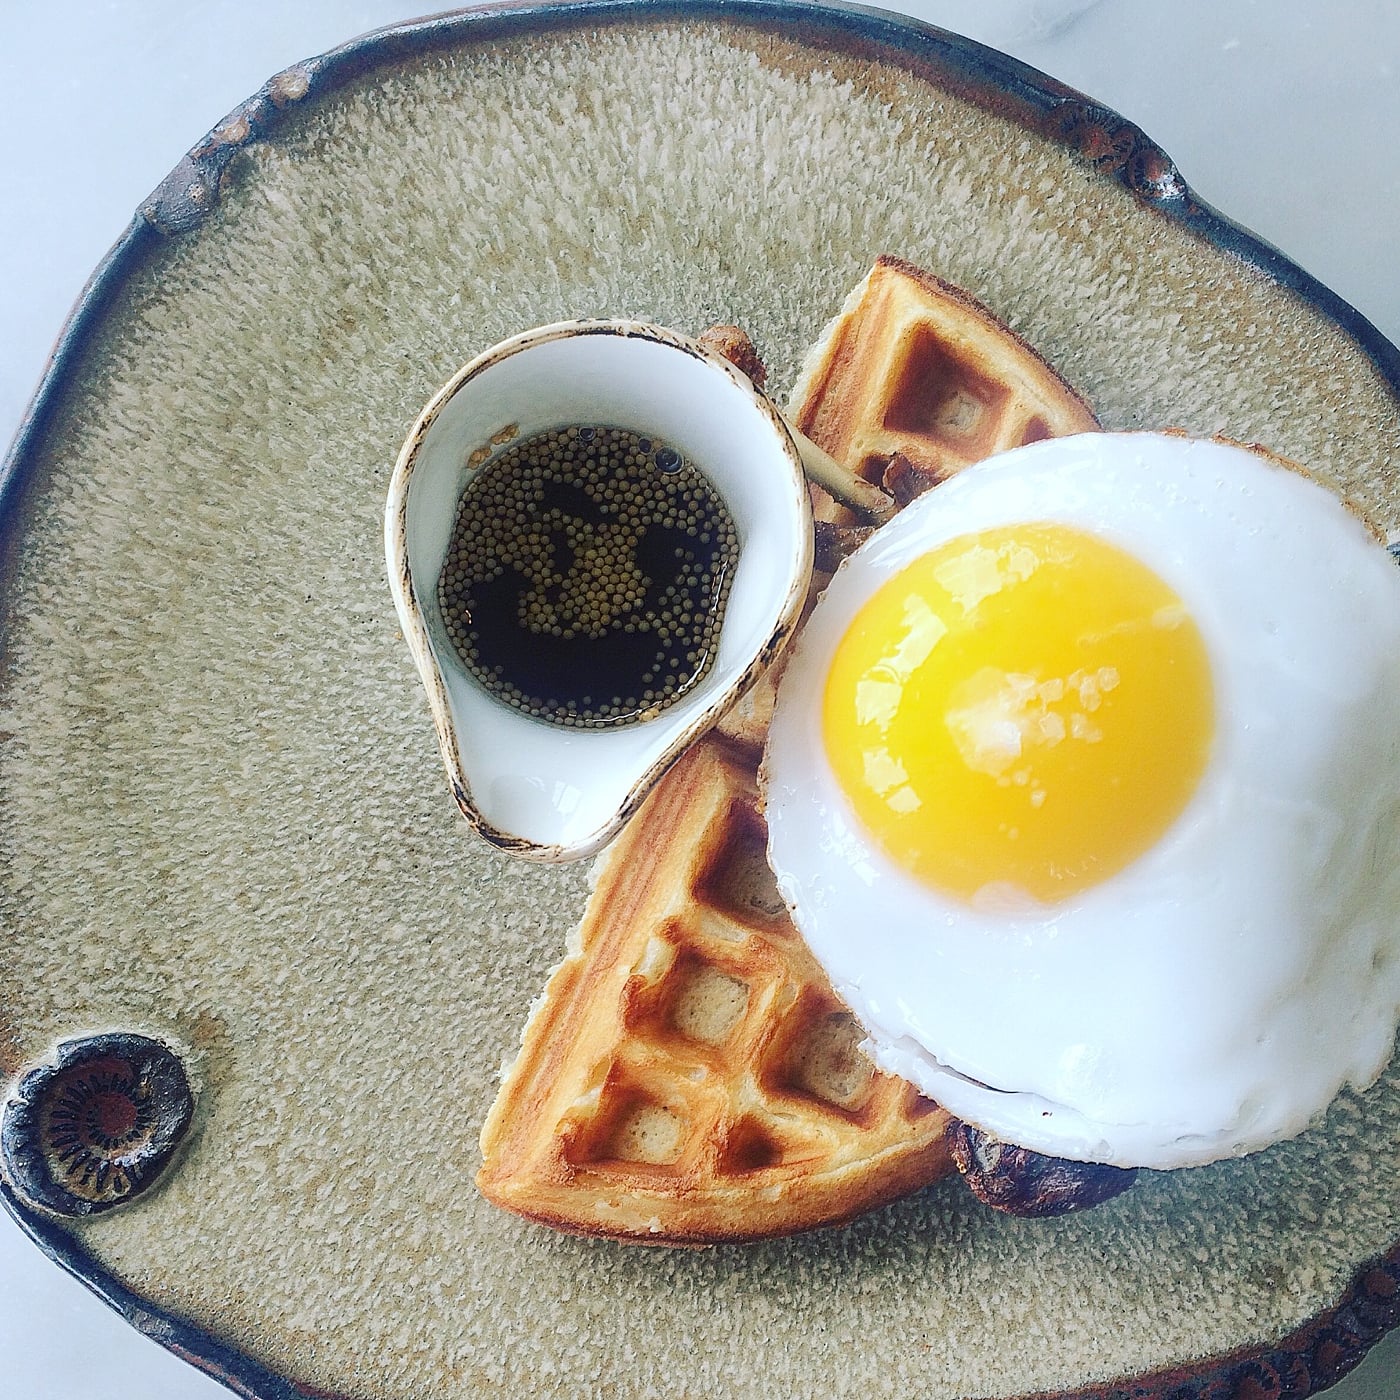 Duck and Waffle's signature dish, a plate of confit duck on top of a waffle with a friend egg, one of the best luxury london breakfast spots